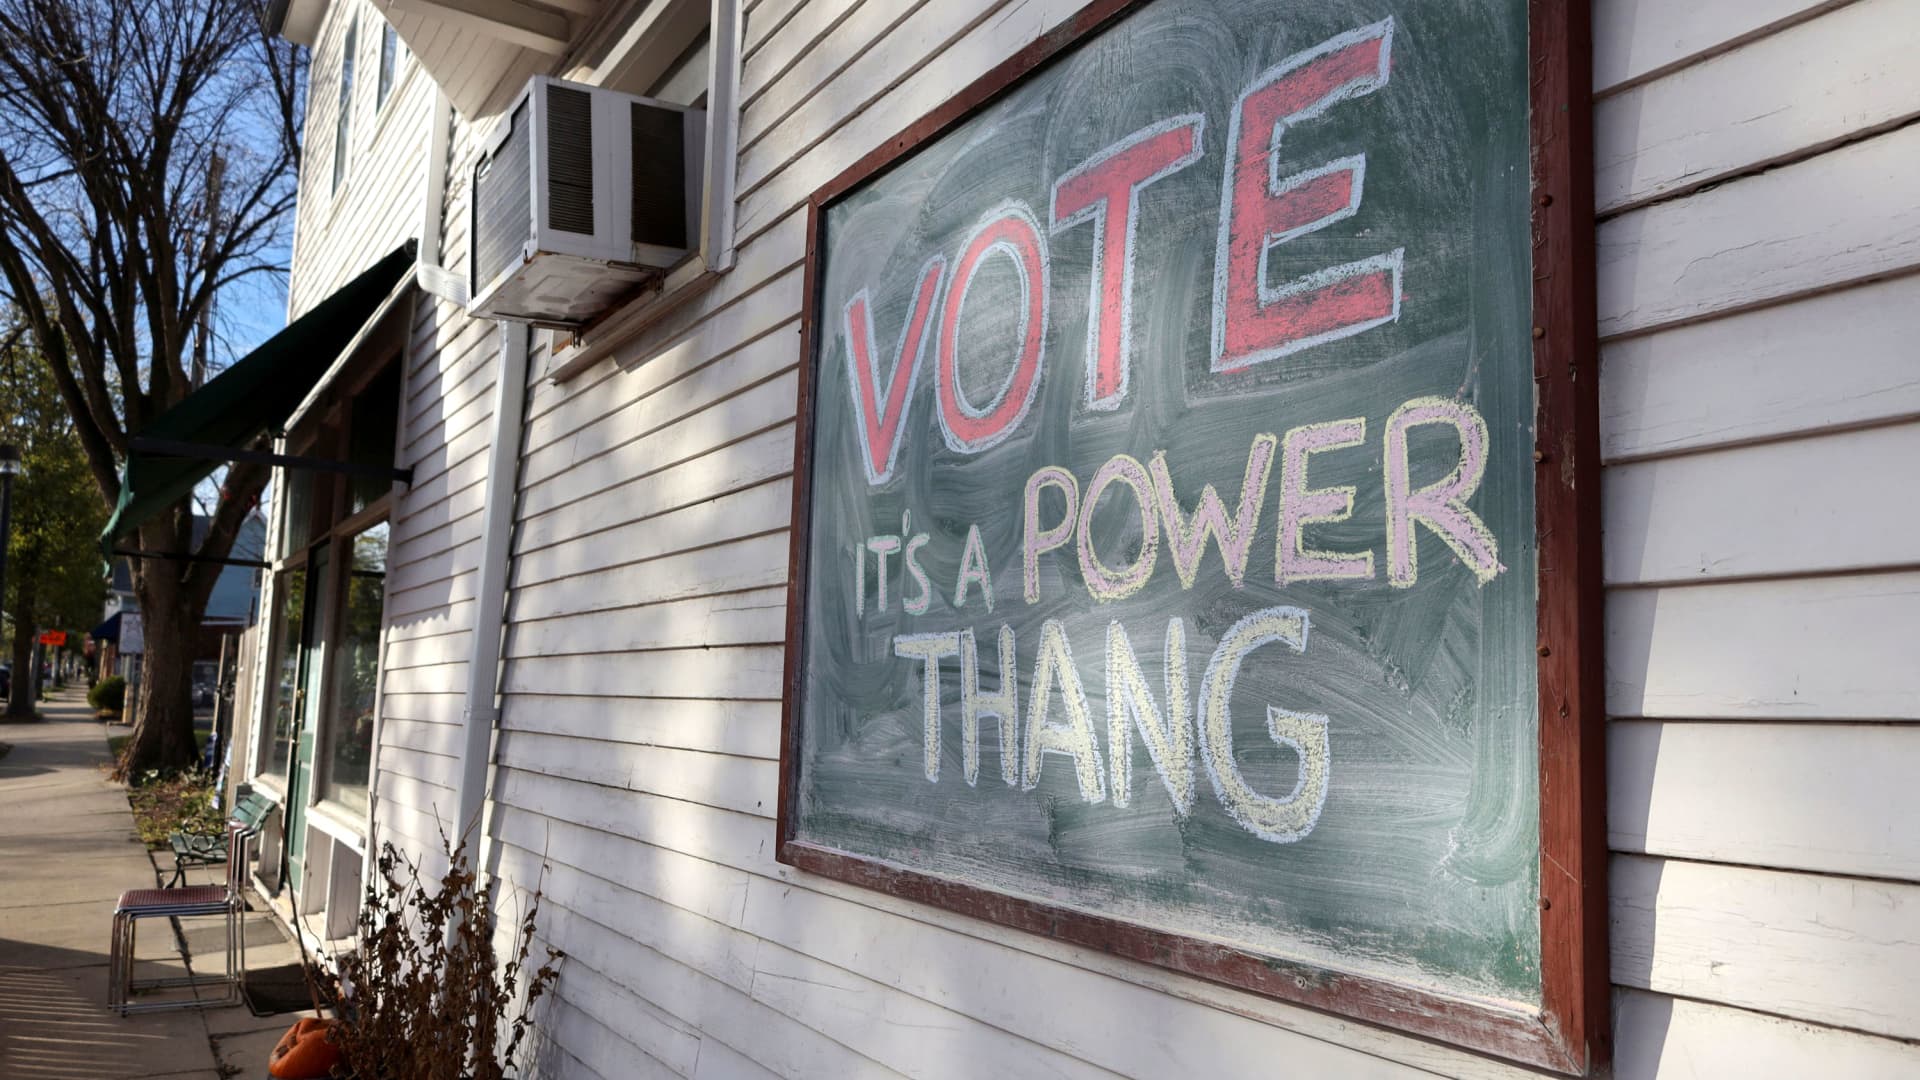 A chalkboard sign encouraging people to vote in the midterm elections hangs in Milwaukee, Wisconsin, November 8, 2022.